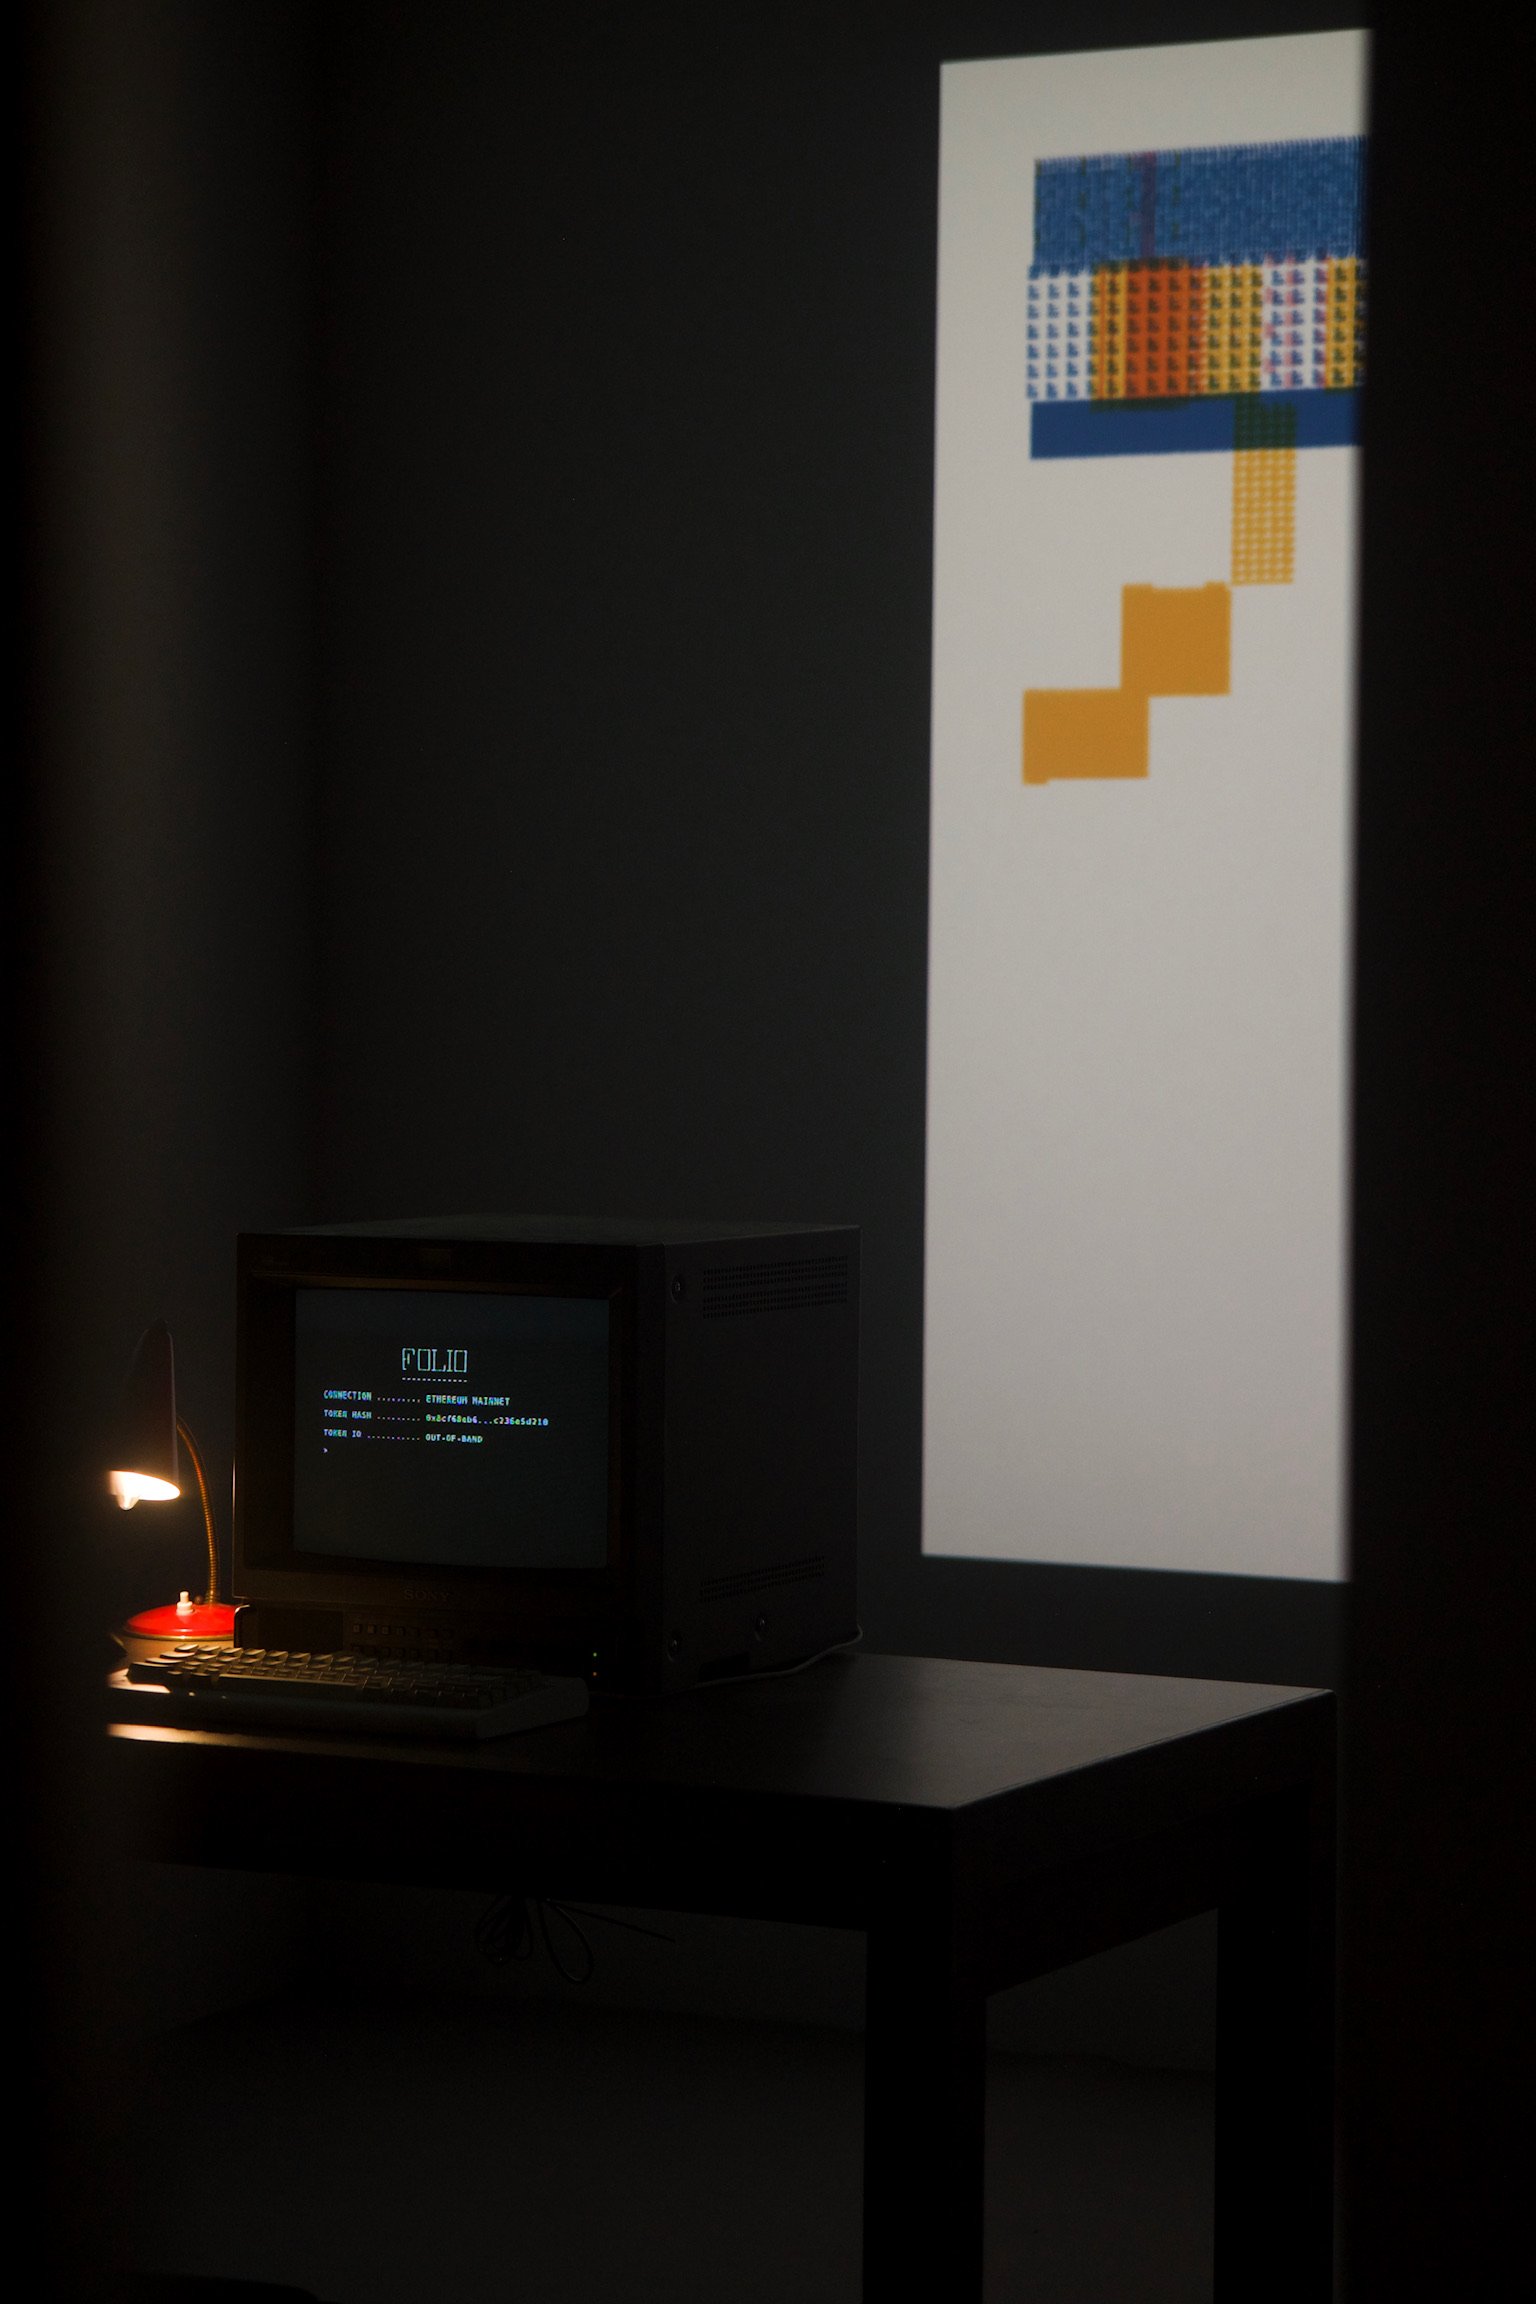 An image projected on a wall. In front of the wall a table in the middle of a dimly lit room. On the table, an old school computer monitor showing a terminal, a mechanical keyboard, and a lamp.